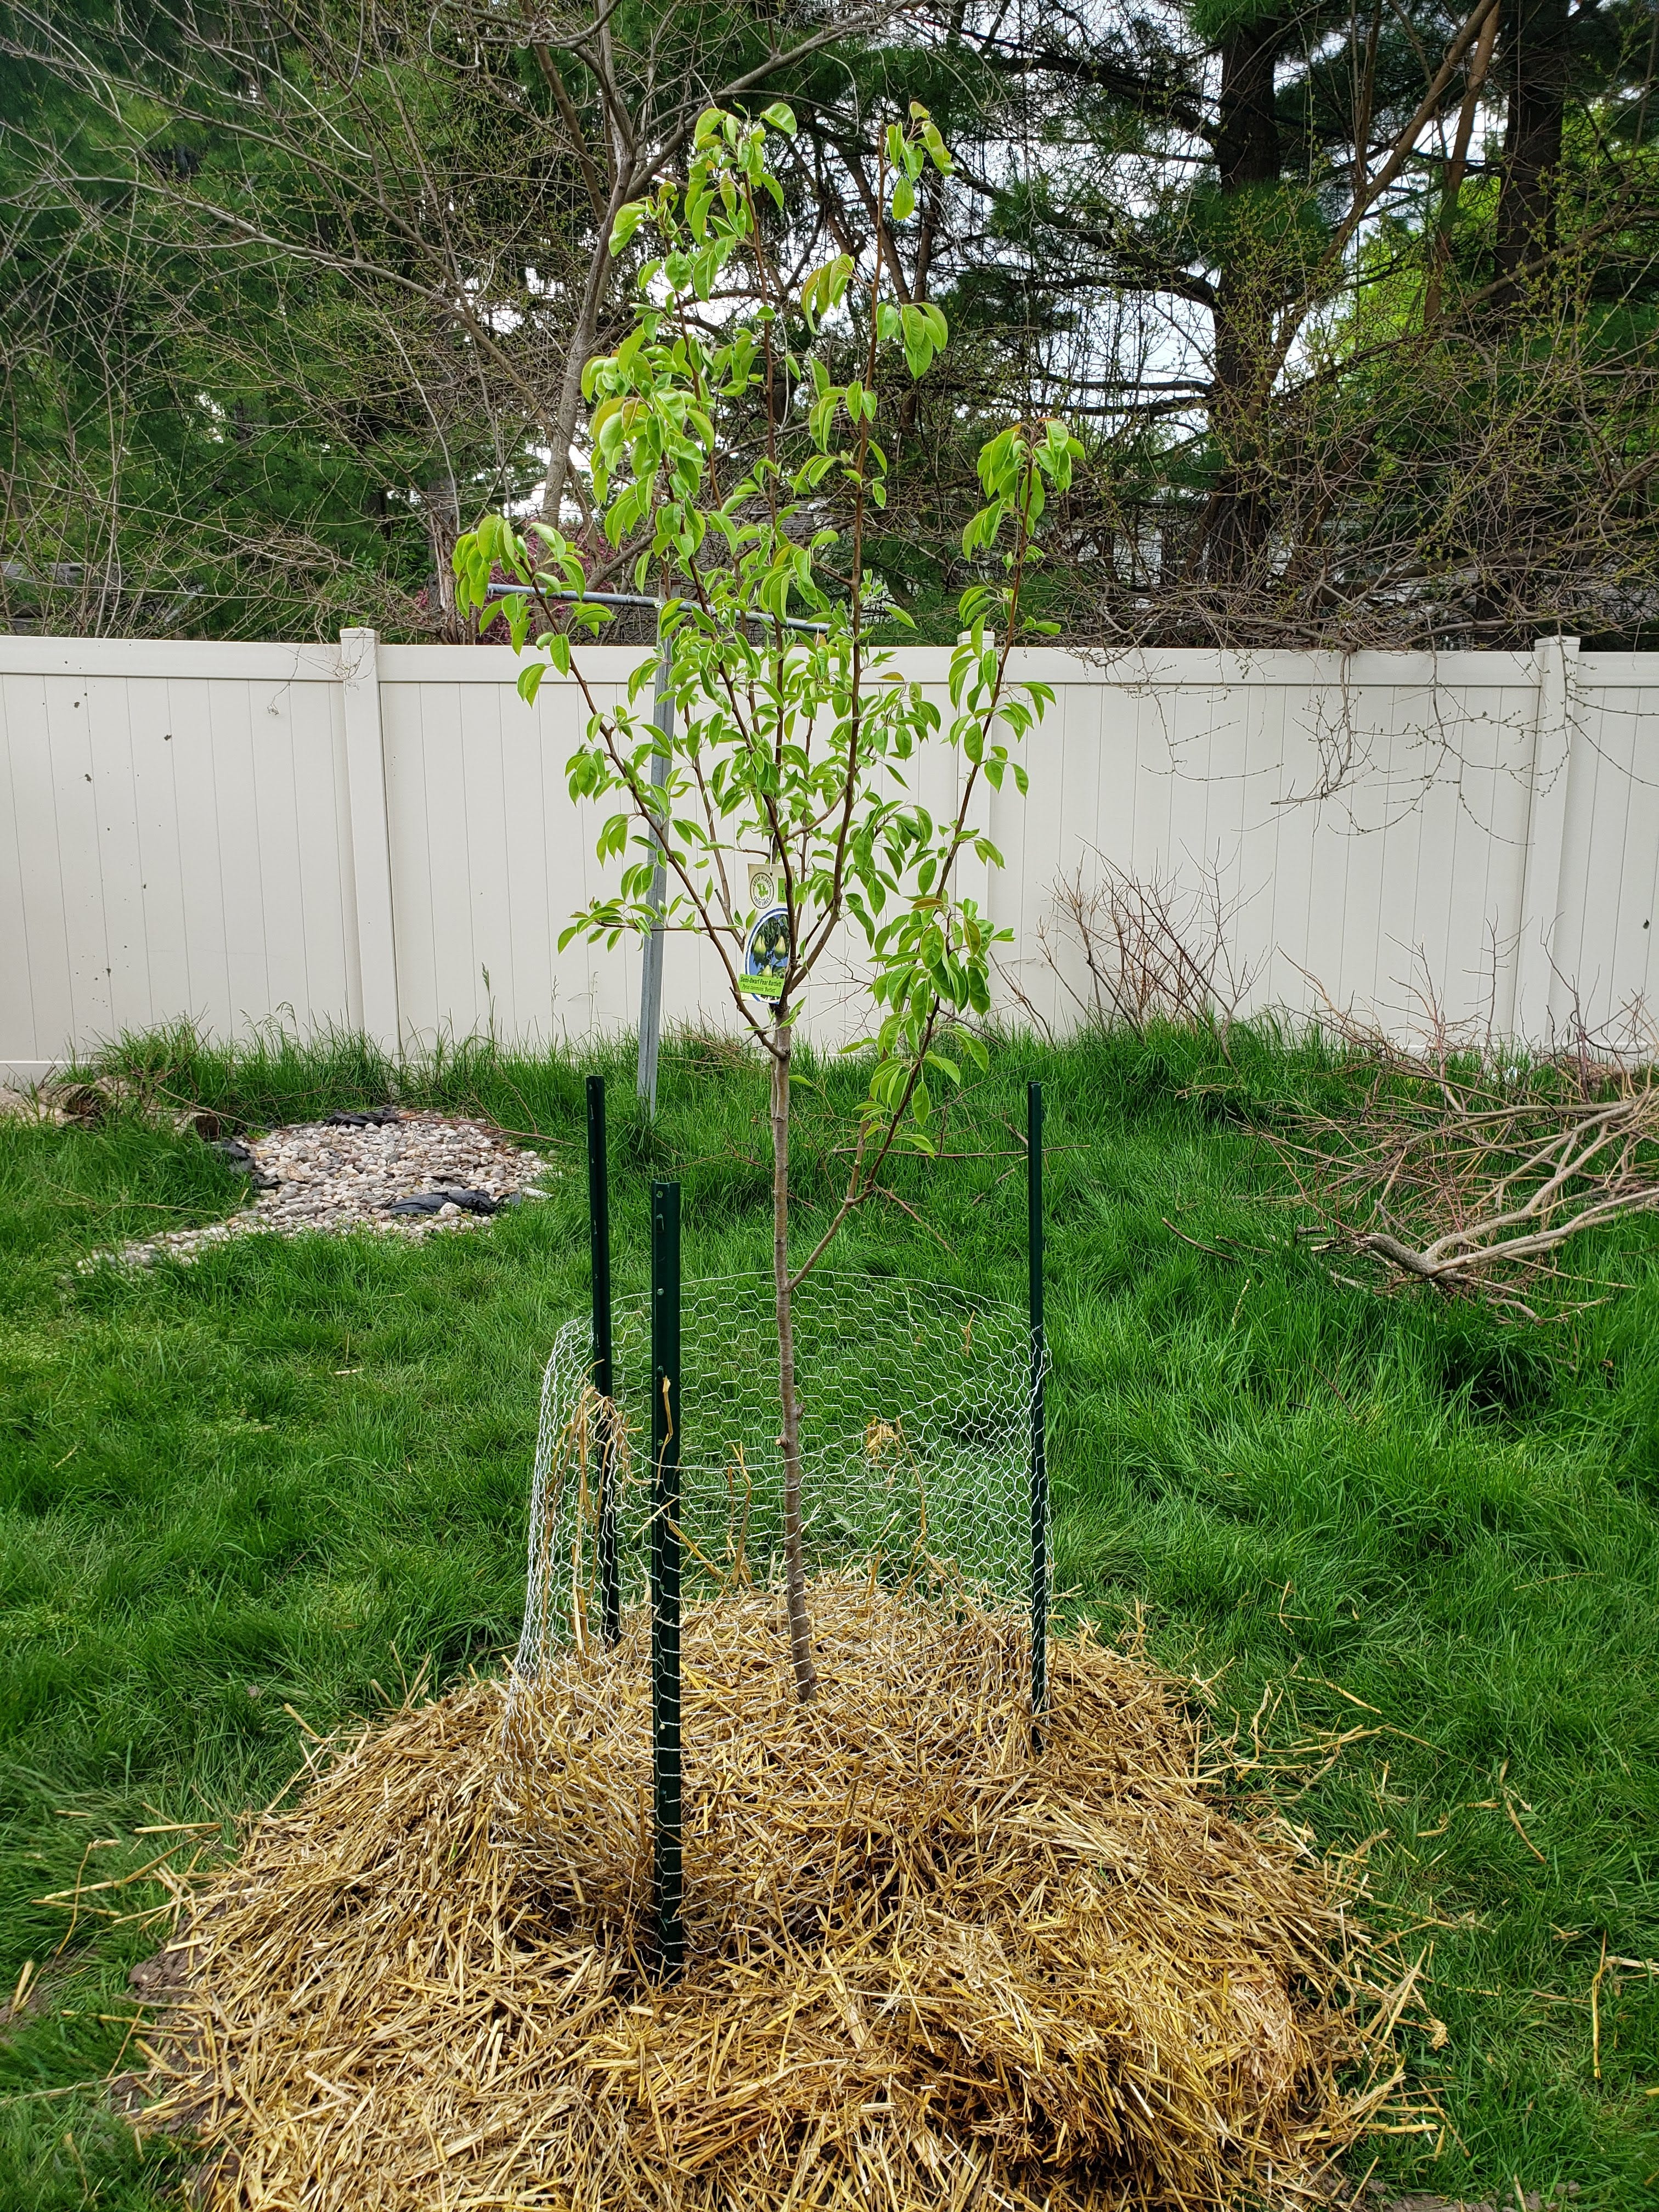 🌱🌳🍑 Guess who's turning their suburban backyard into a mini orchard, fruit trees backyard